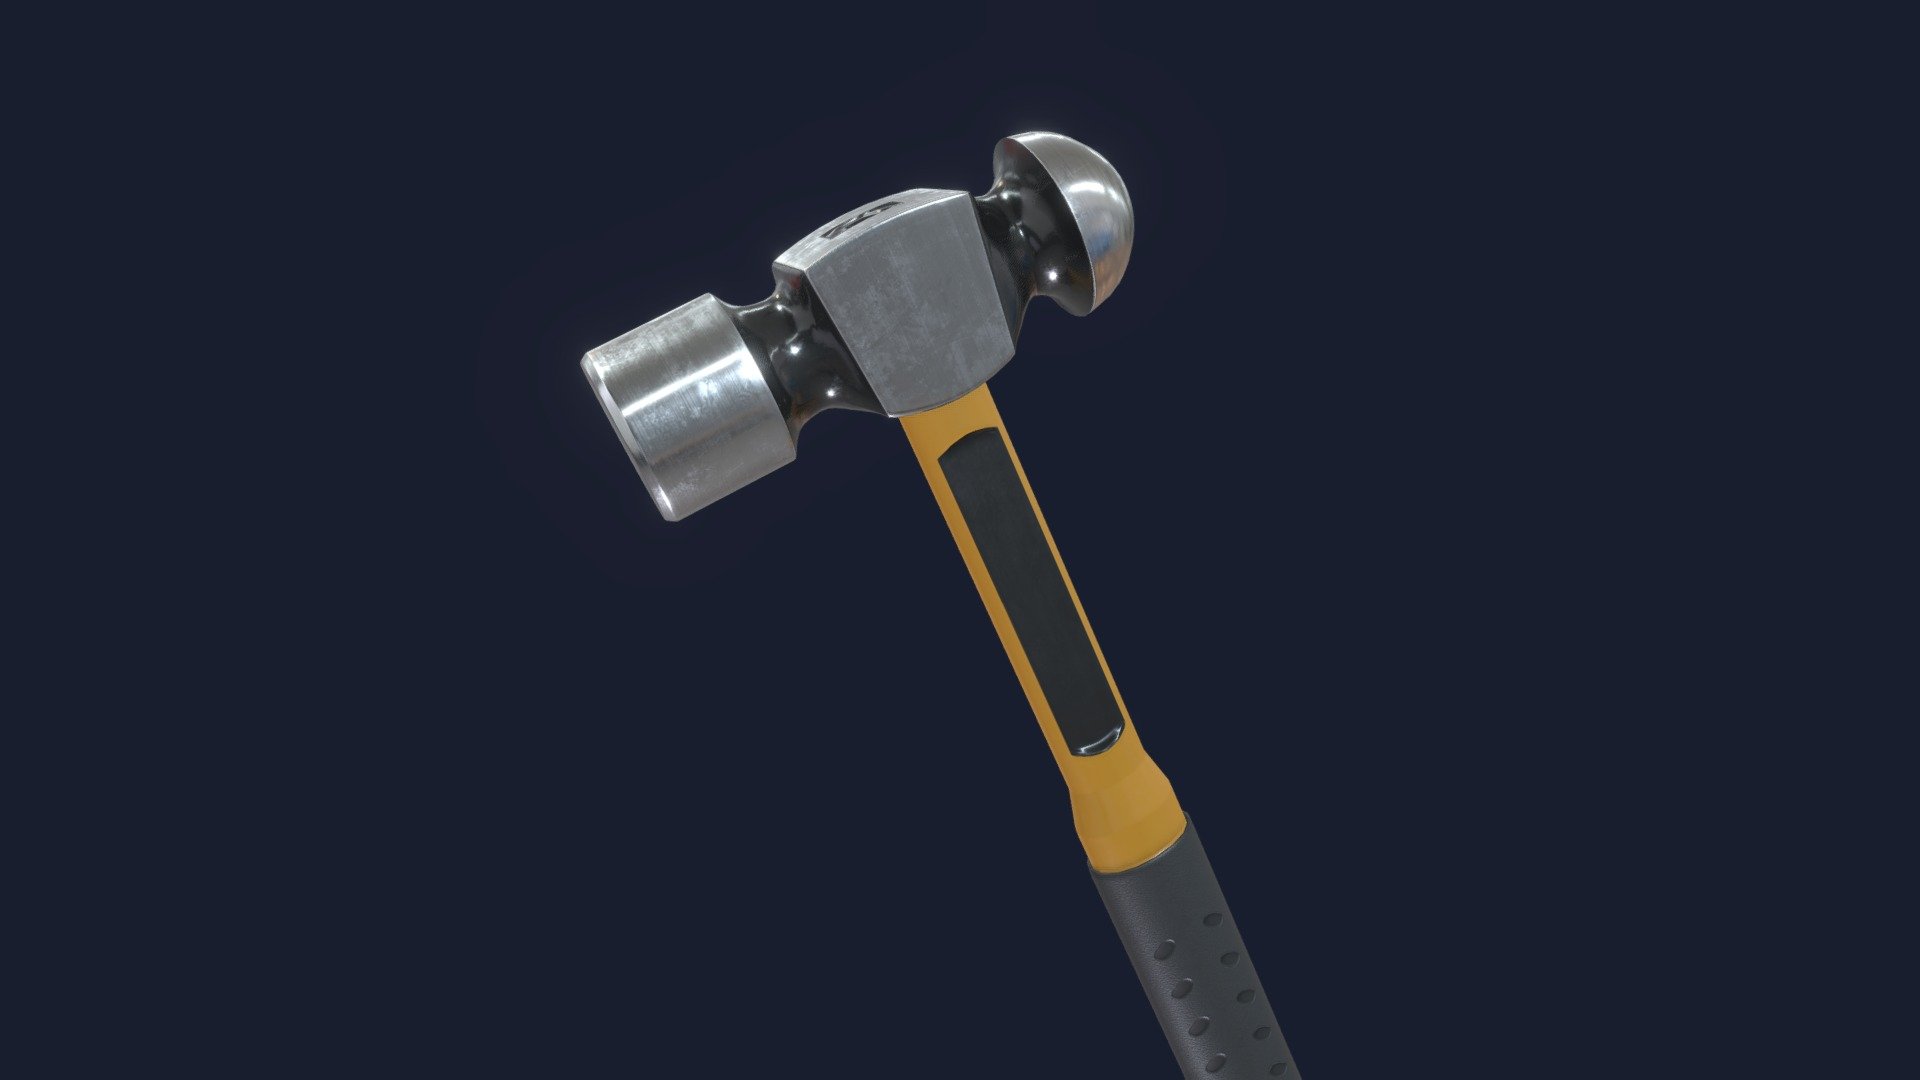 Here is a ballpeen hammer that I have modeled for Adobe Stock. For submission I have the textures at 4K and I was also only allowed to use only quads (I could use tris, but only if necessary). The model was to be used inside of Adobe Dimension.

Quads: 2,380 Tris: 4,760

For the handle normals I used floaters to get the smaller details.

I modeled using 3ds Max and textured using Substance Painter 3d model